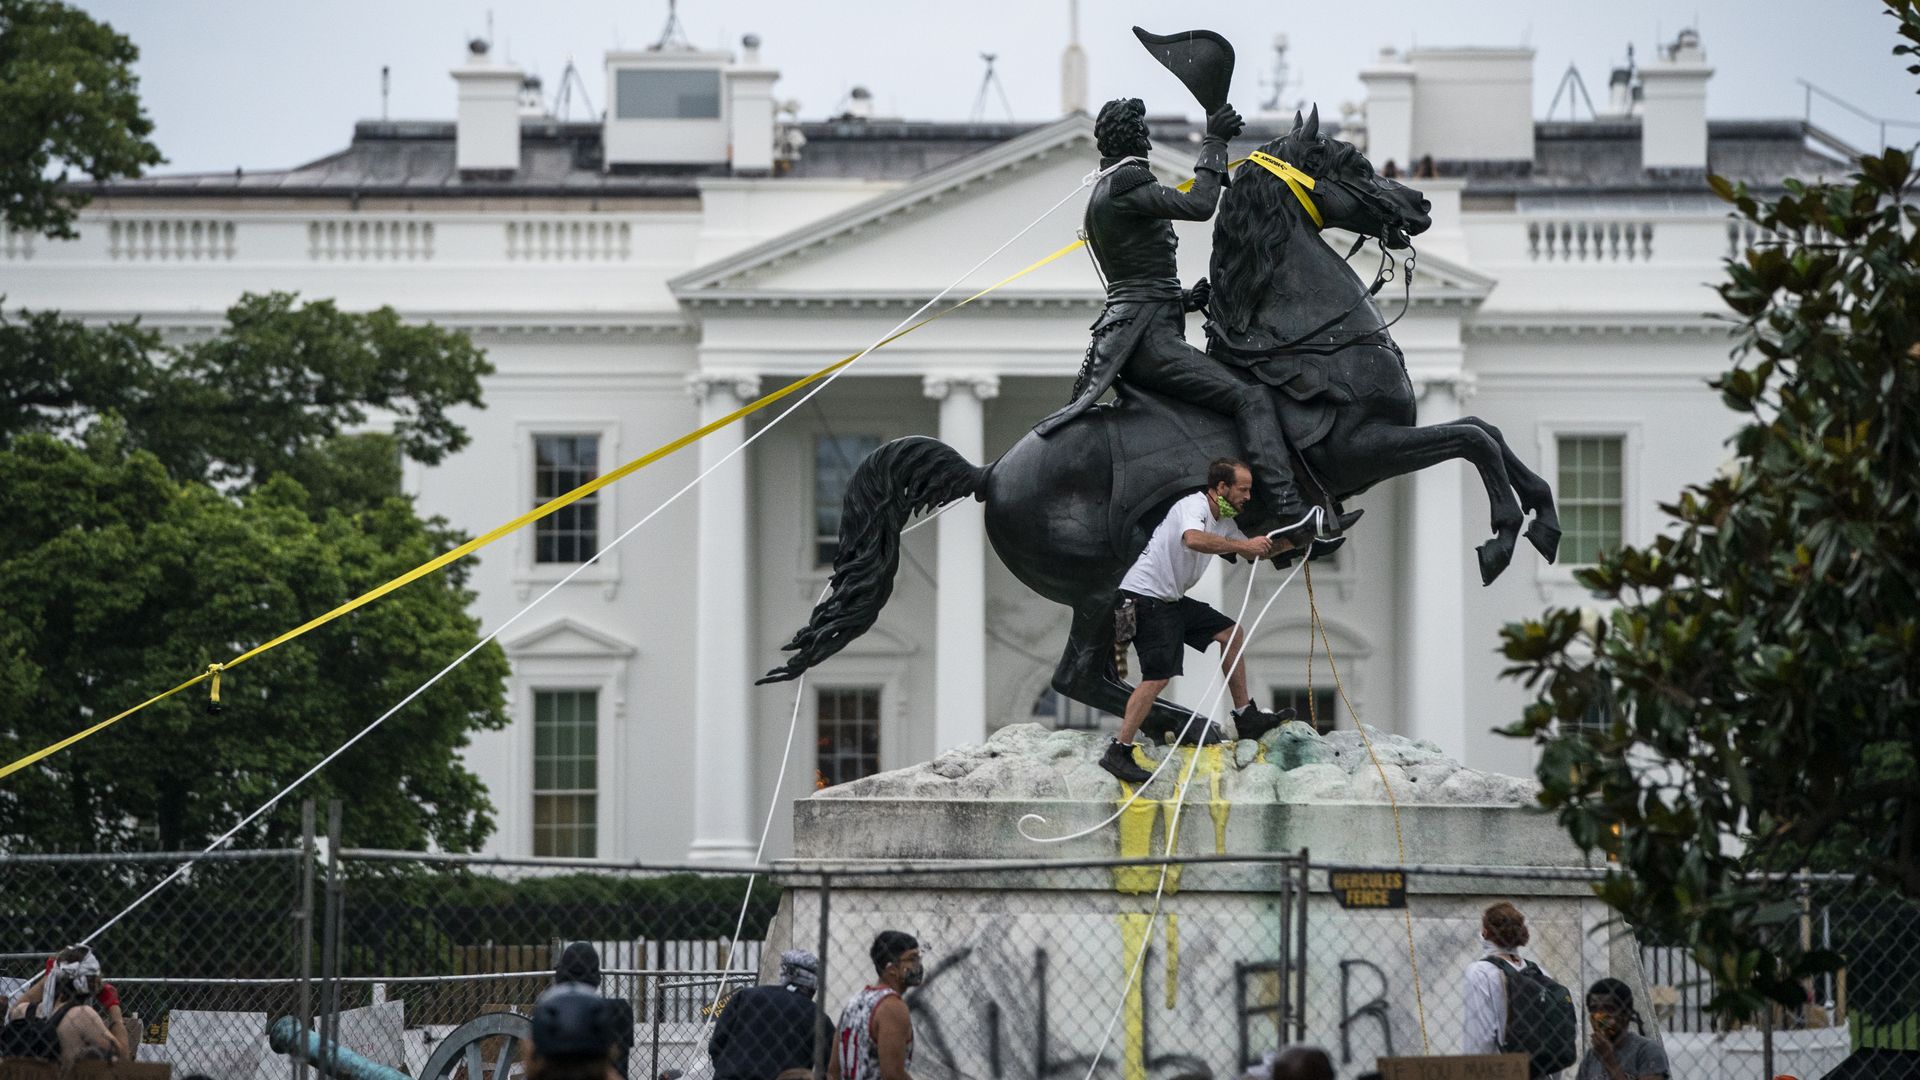  Protesters attempt to pull down the statue of Andrew Jackson in Lafayette Square near the White House on June 22, 2020 in Washington, DC. 